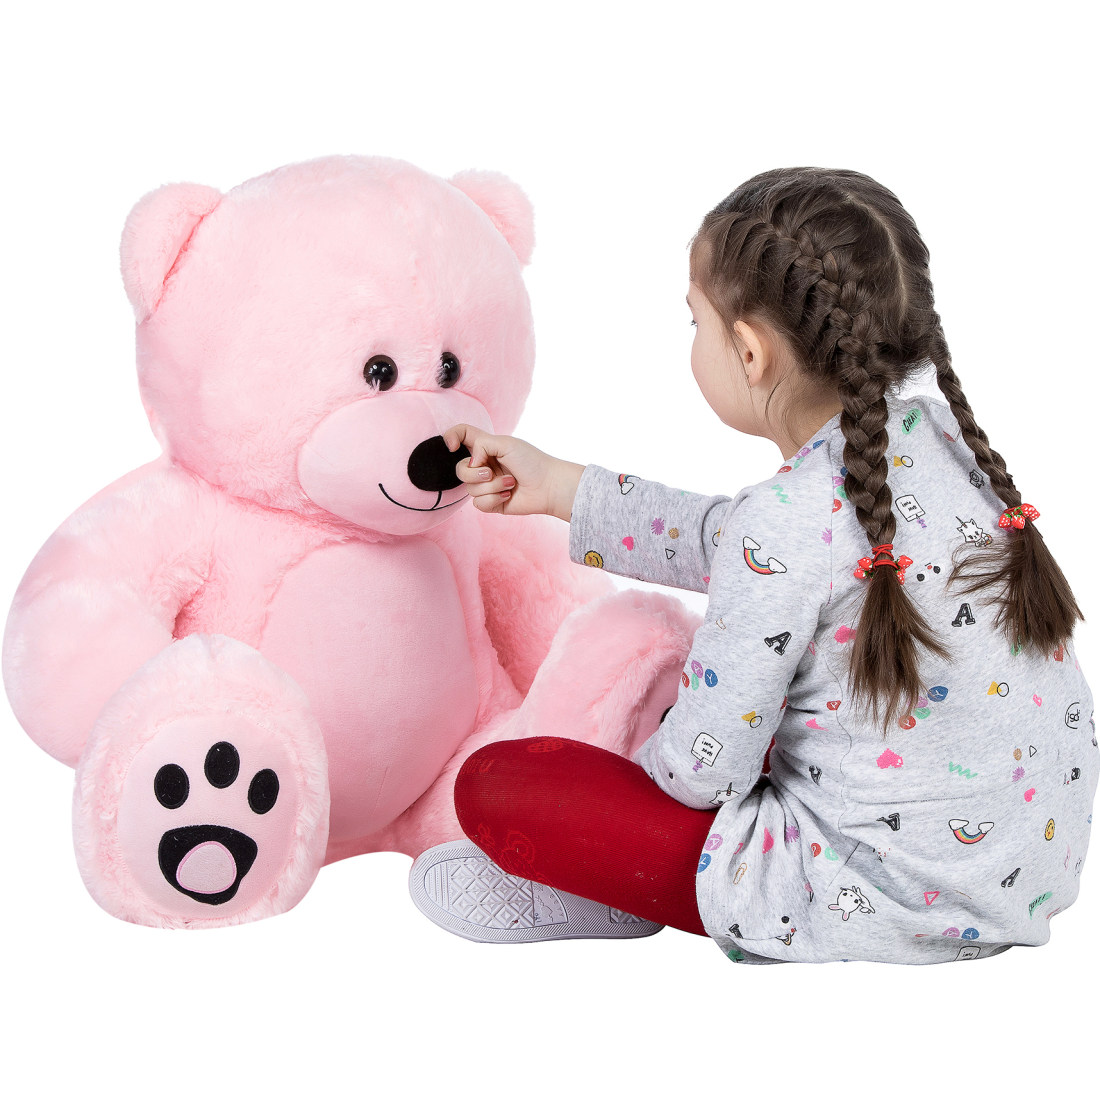 6 reasons you should gift soft toys to your girlfriend - AZ Big Media